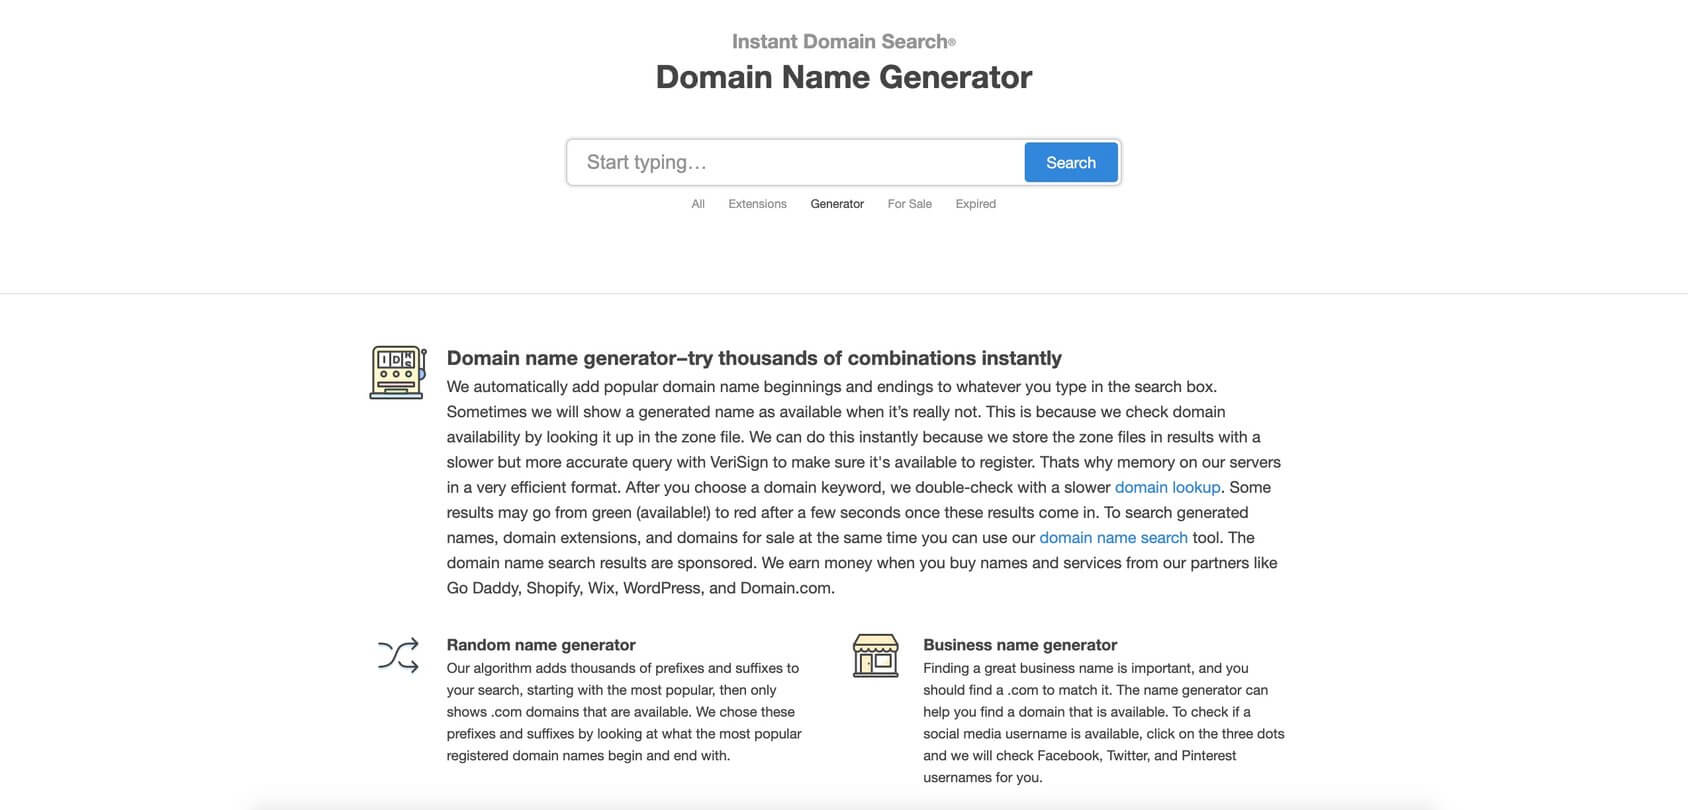 Instant Domain Search homepage